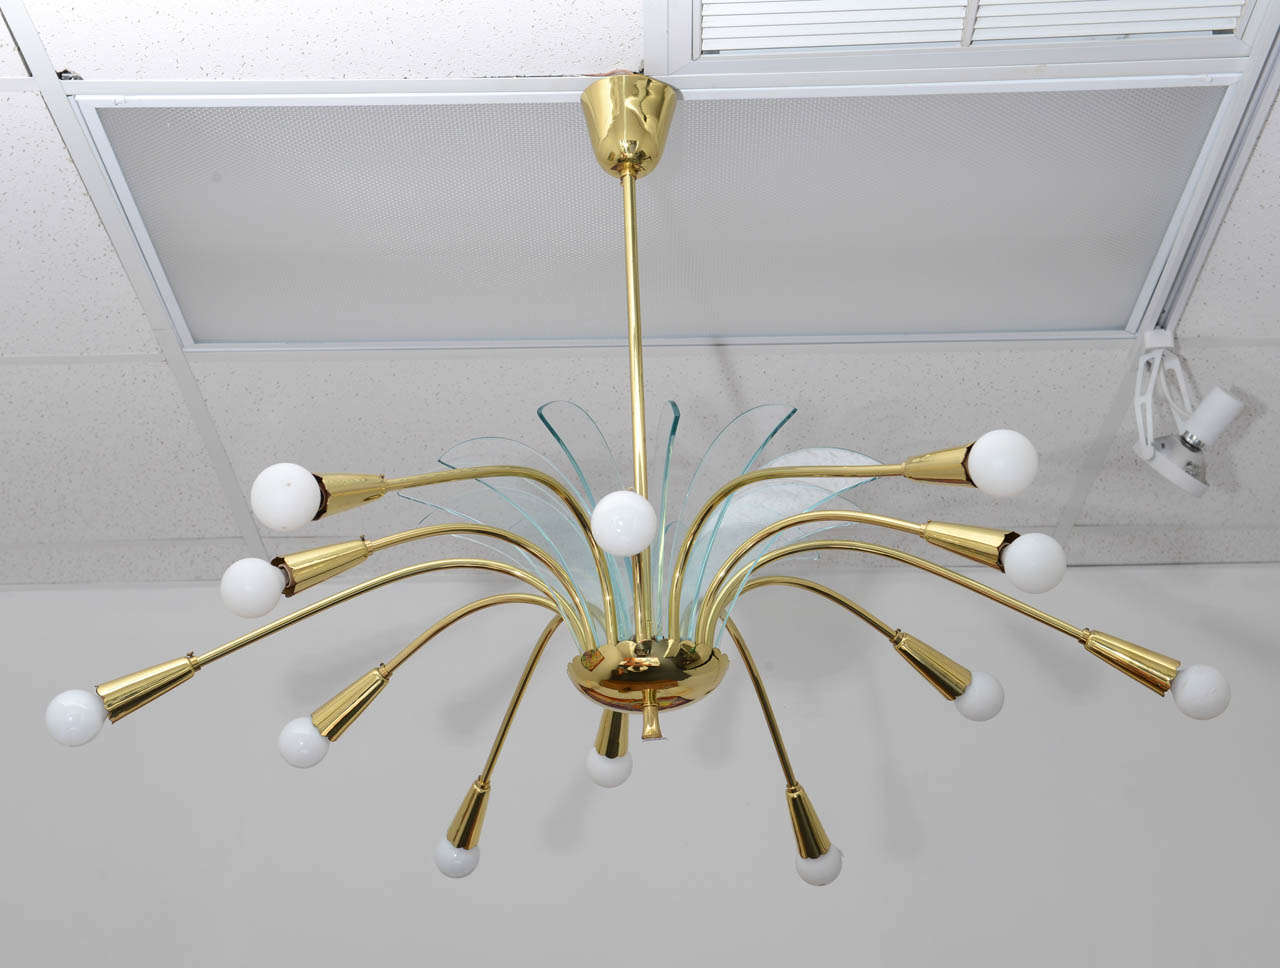 Very pure lines and design for this Italian chandelier from the 1960s.
Glass crown around and above in the central upper part.
12 lamps give a very good lightening.